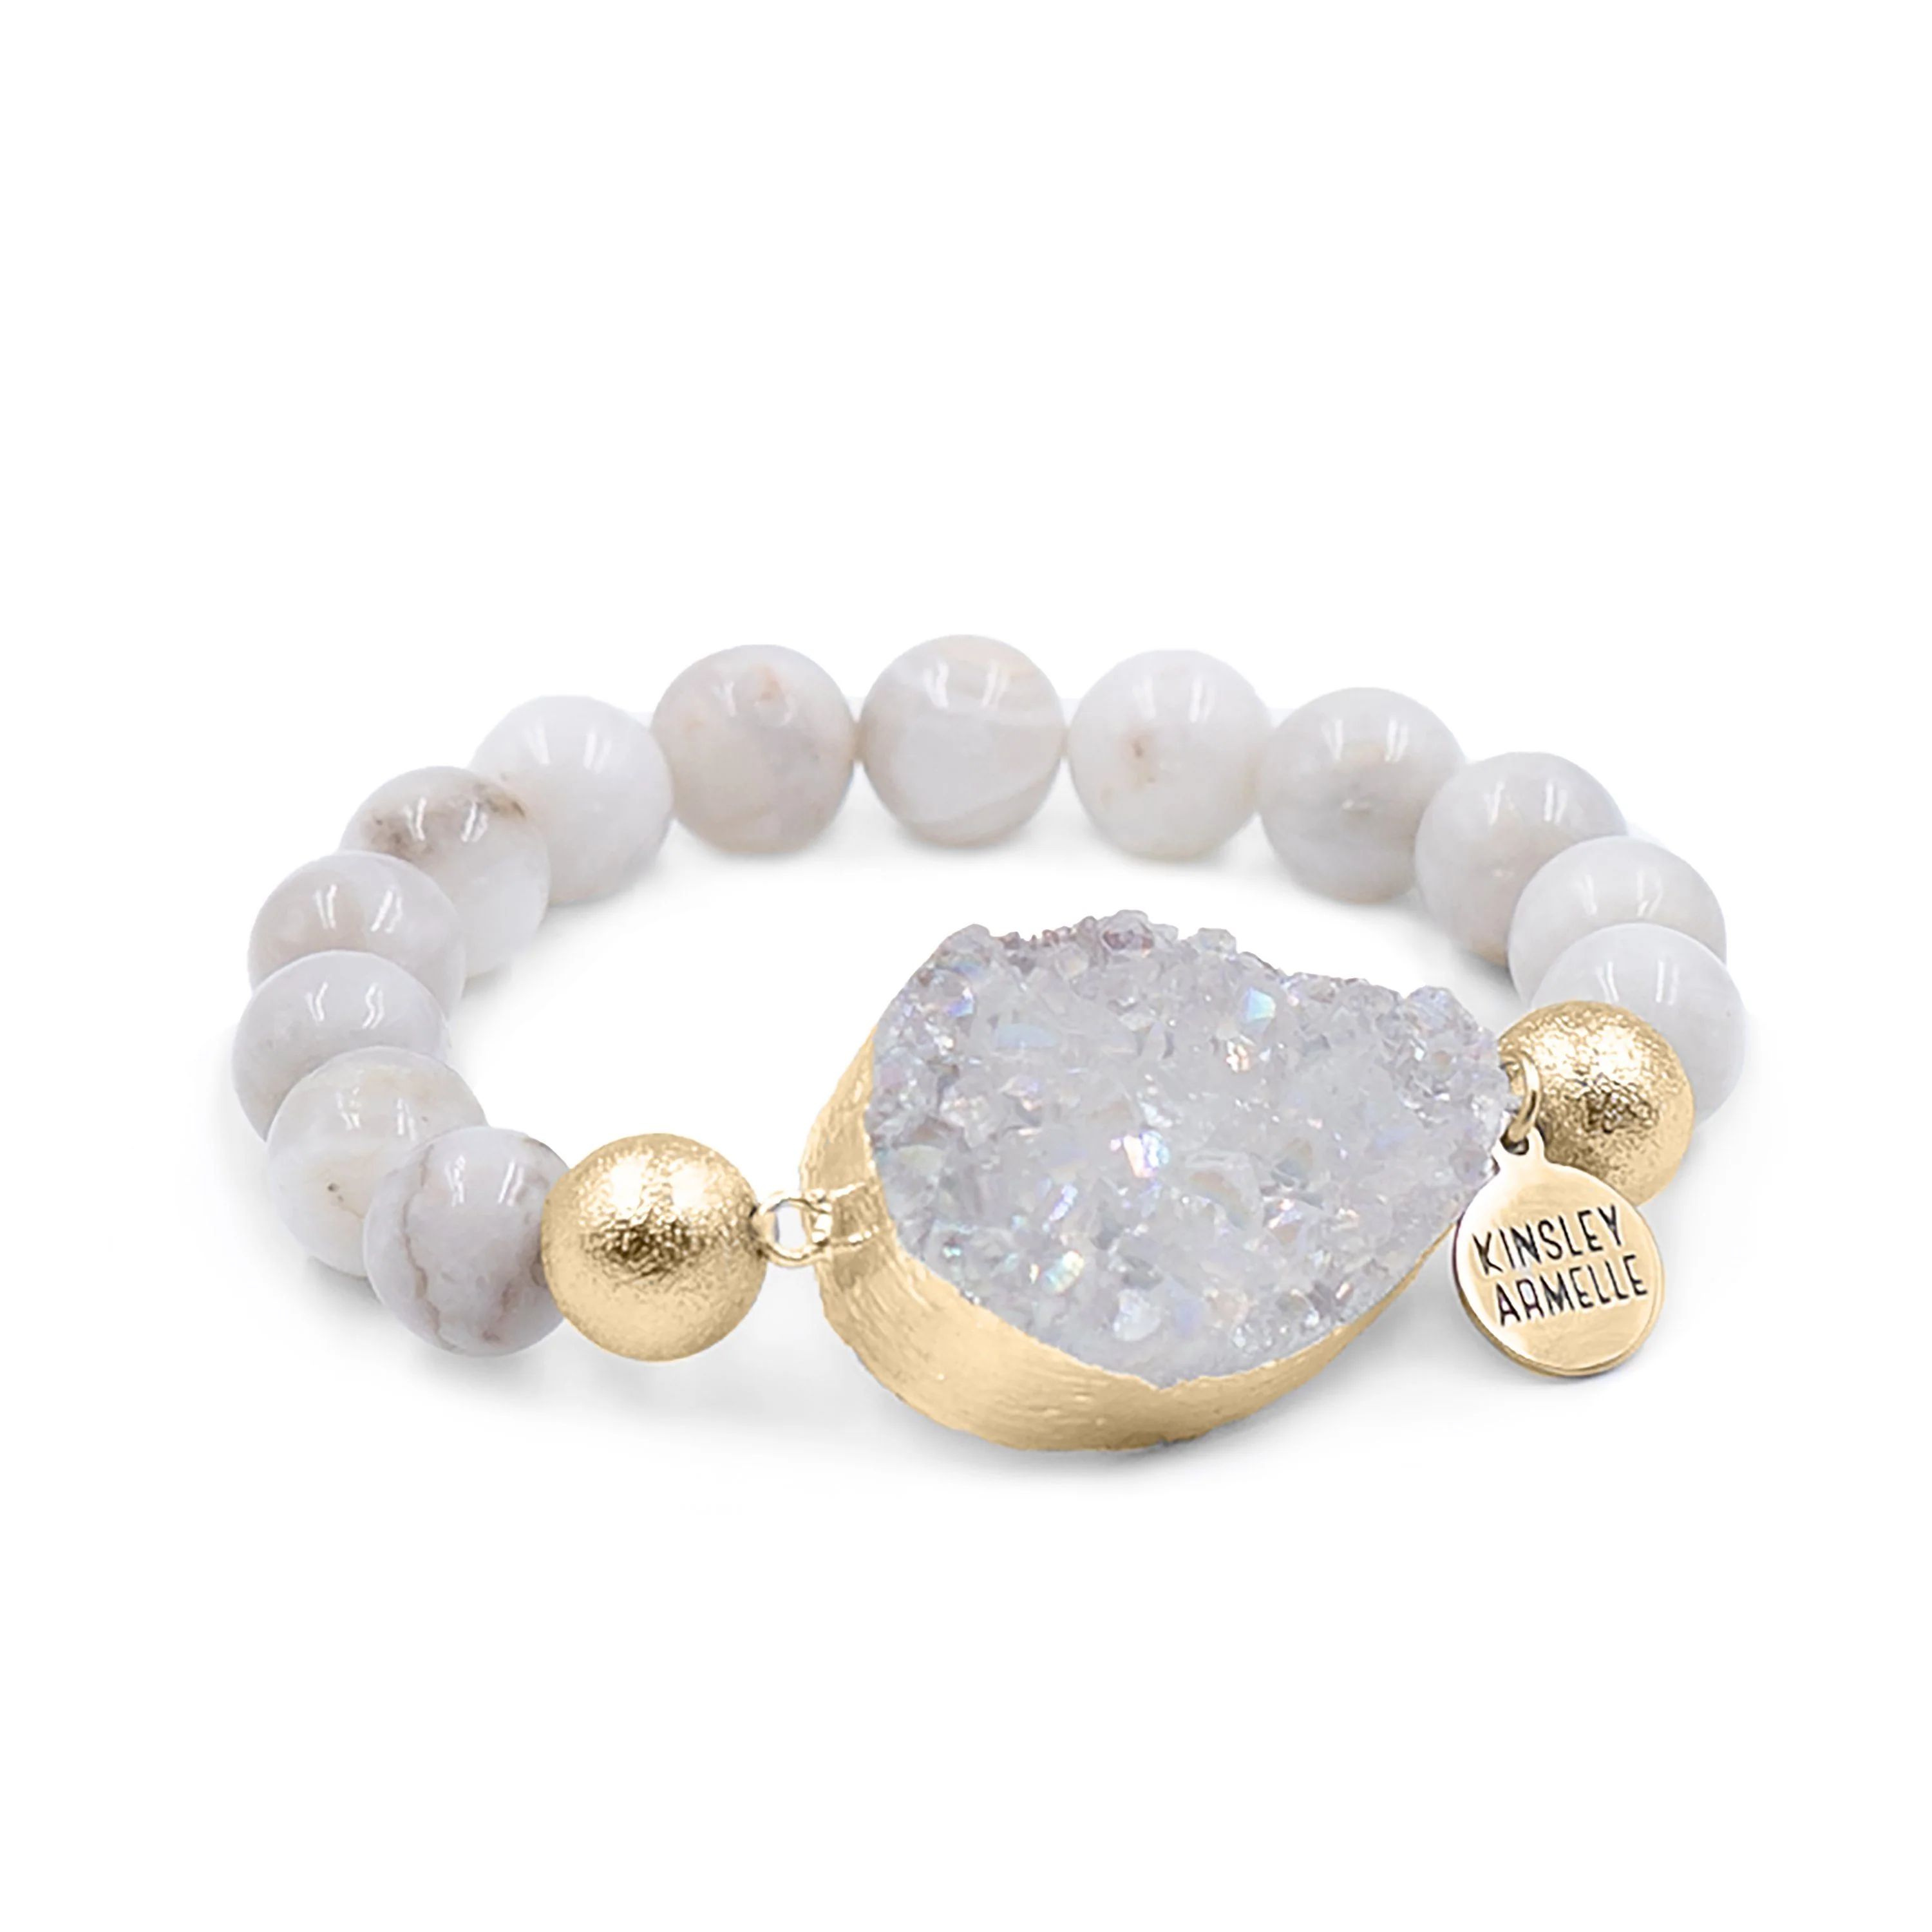 Stone Collection | Kinsley Armelle